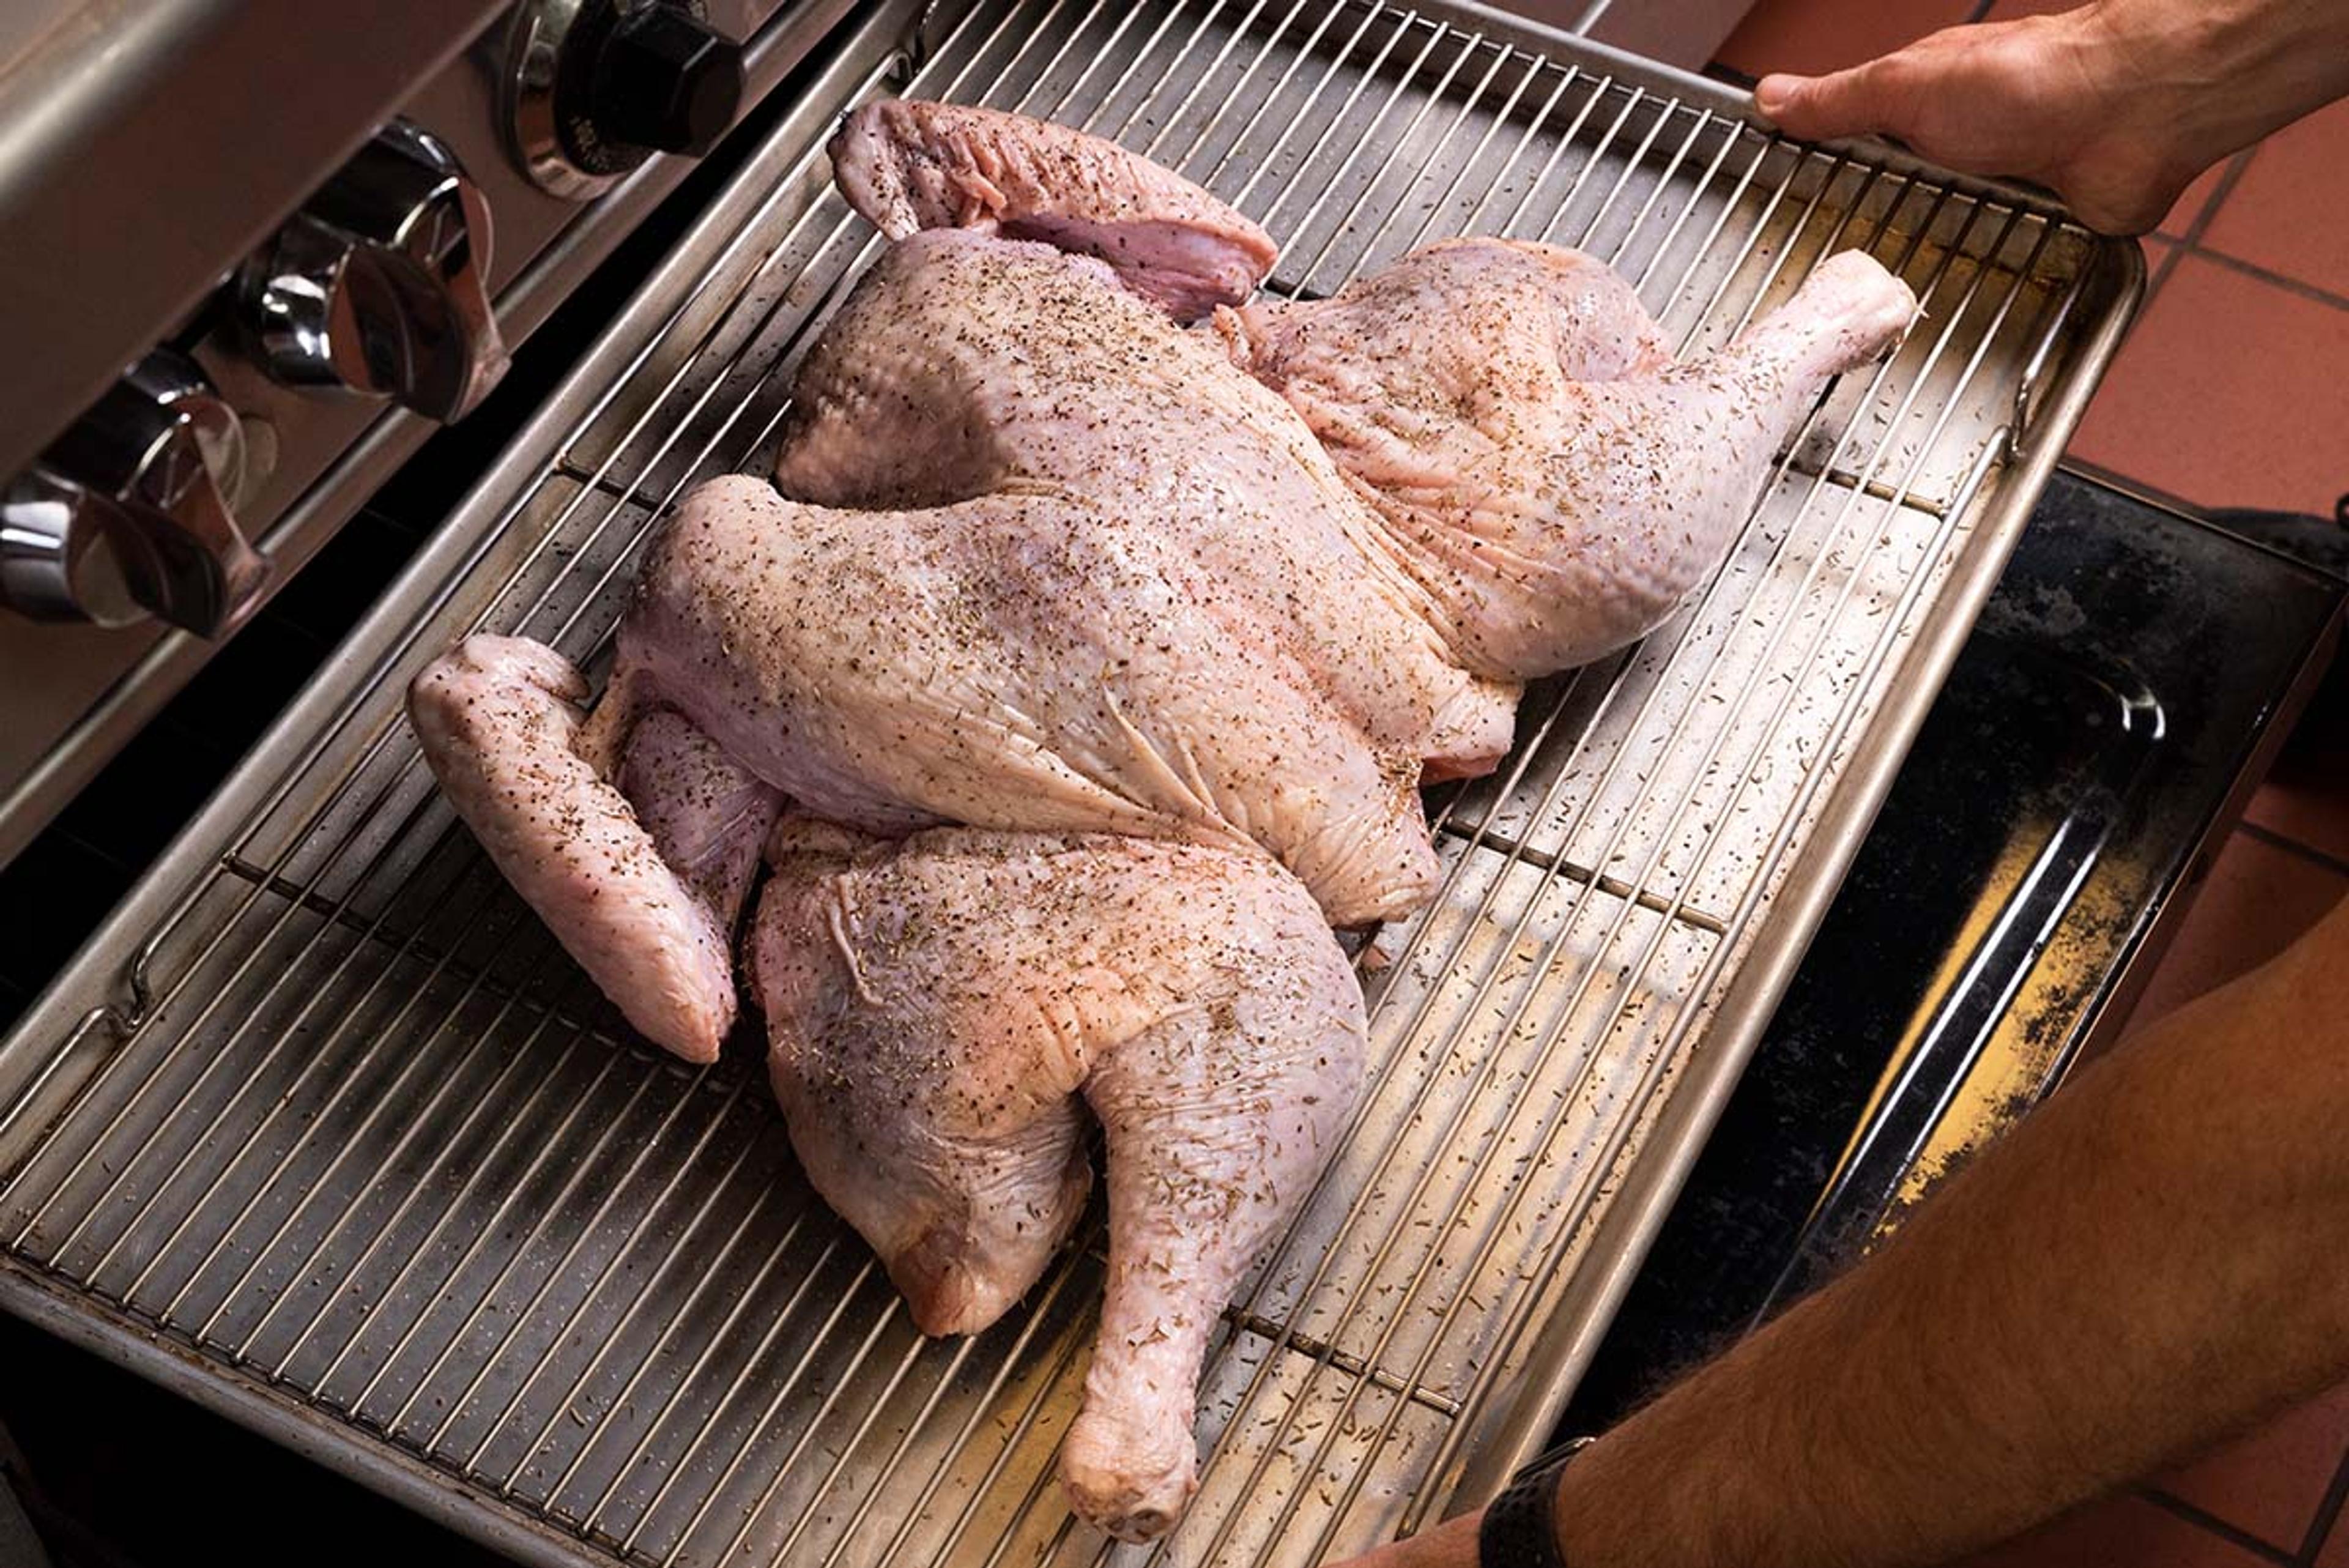 Put the turkey on a wire rack that is placed on a baking sheet.